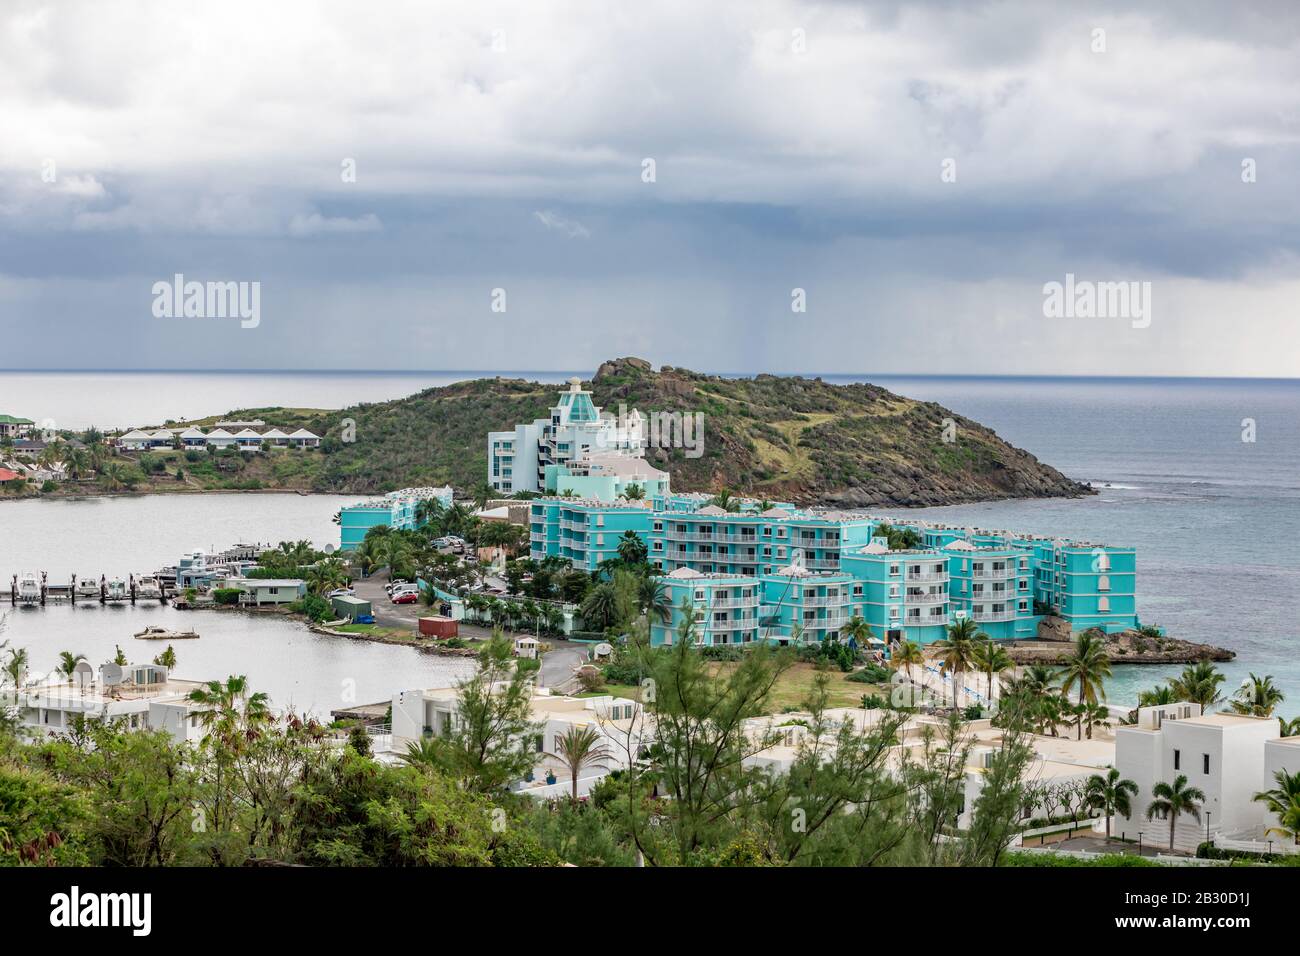 Drone image of Oyster Bay Beach Resort in St Martin Stock Photo